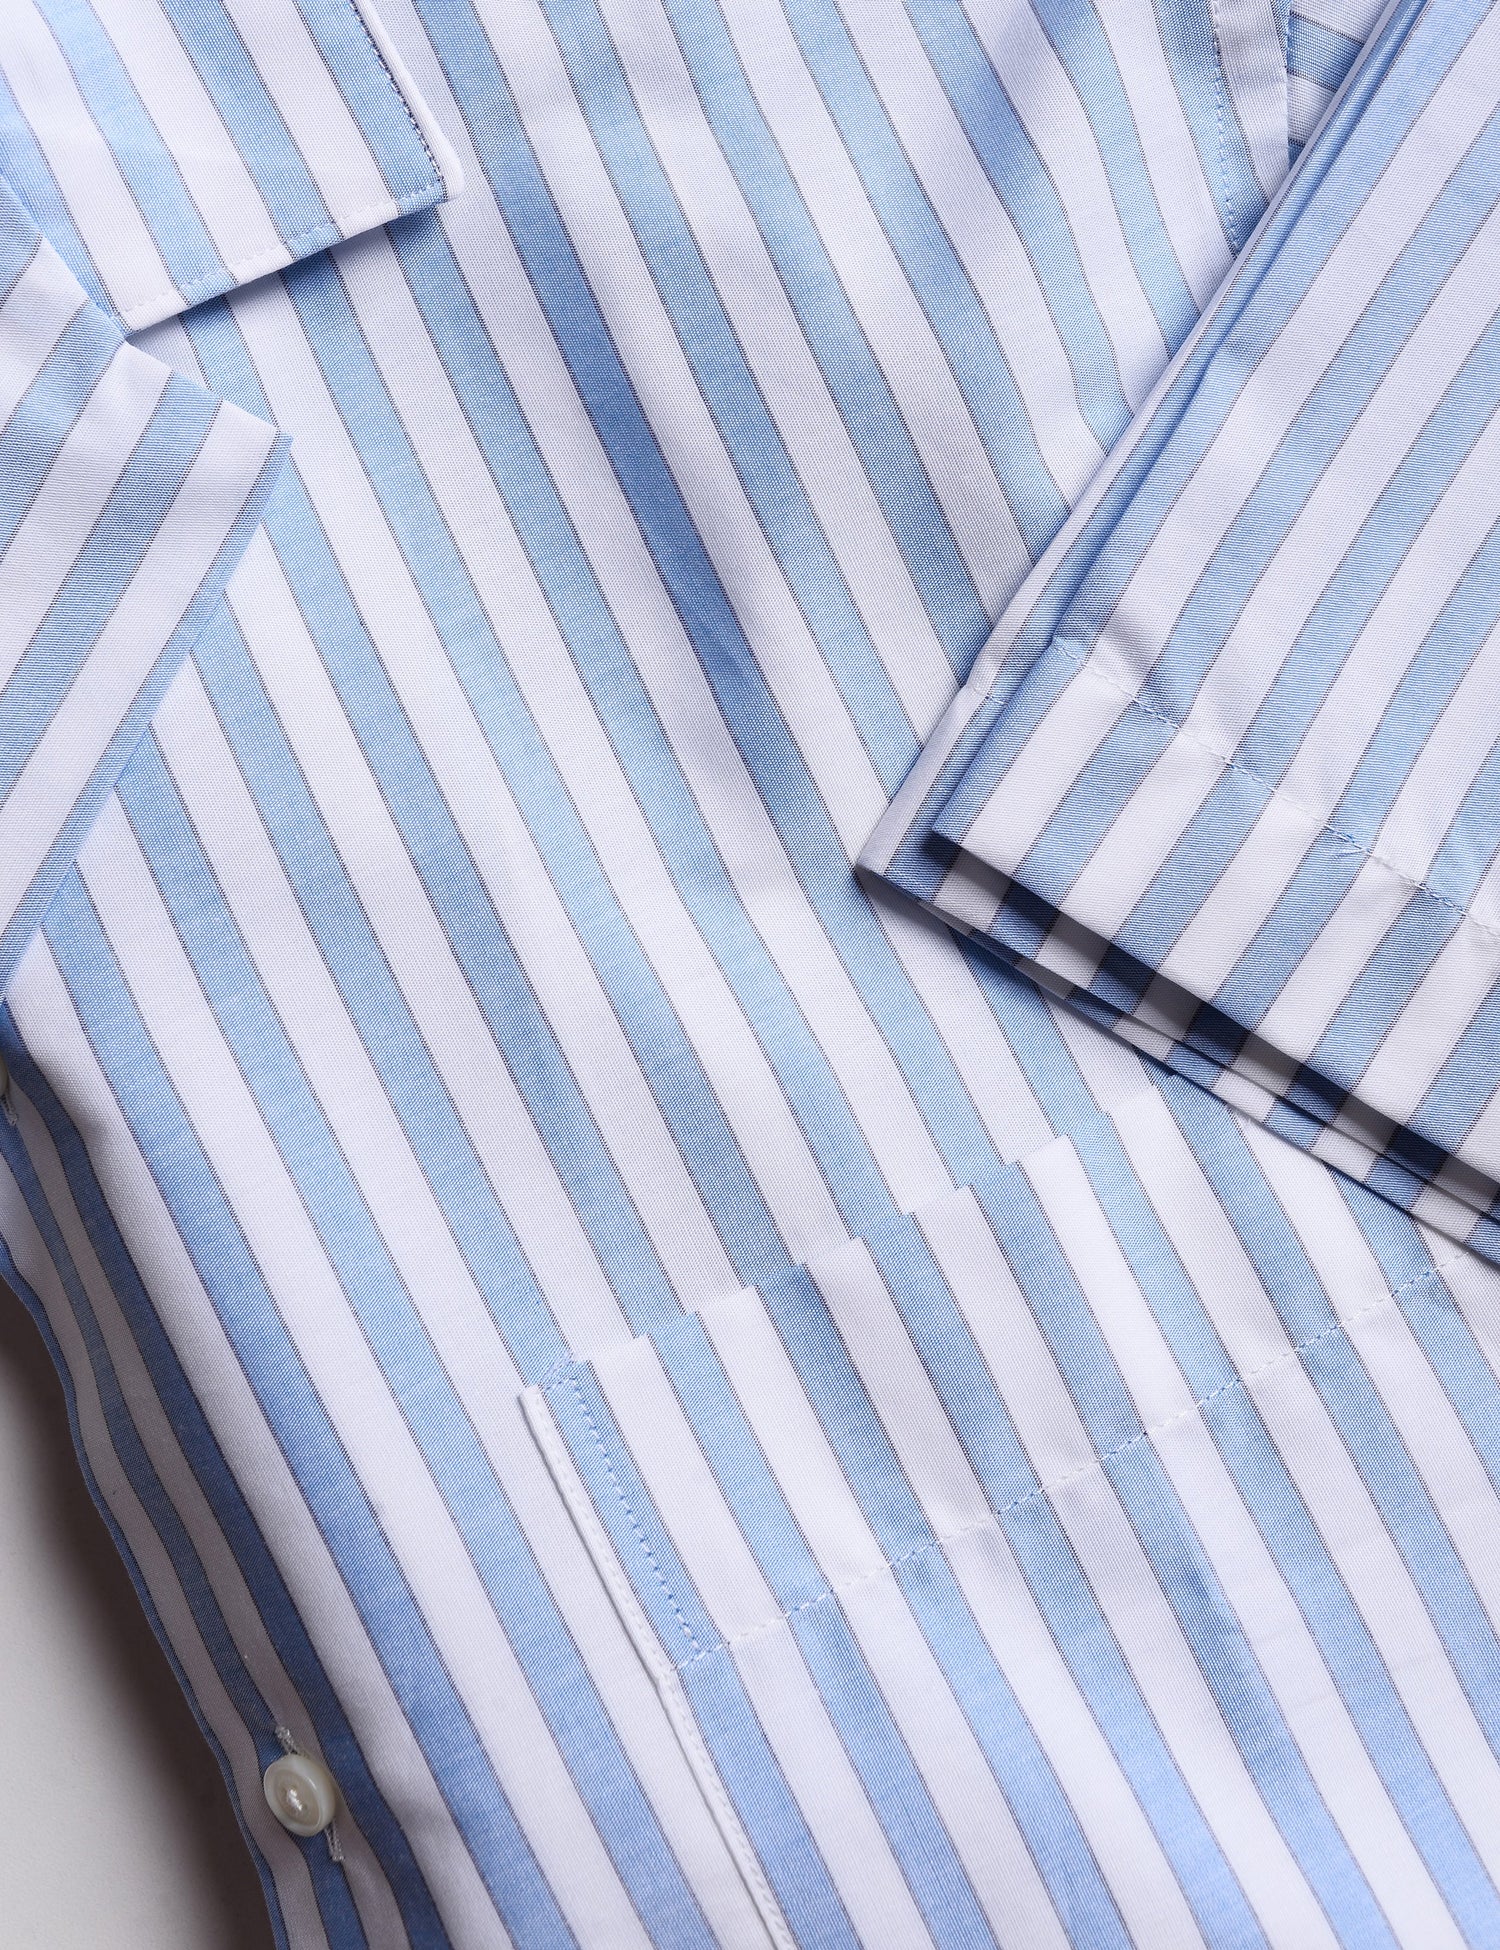 Detail of BKT18 Camp Shirt in Bar Stripe - Air Blue showing sleeve and fabric pattern